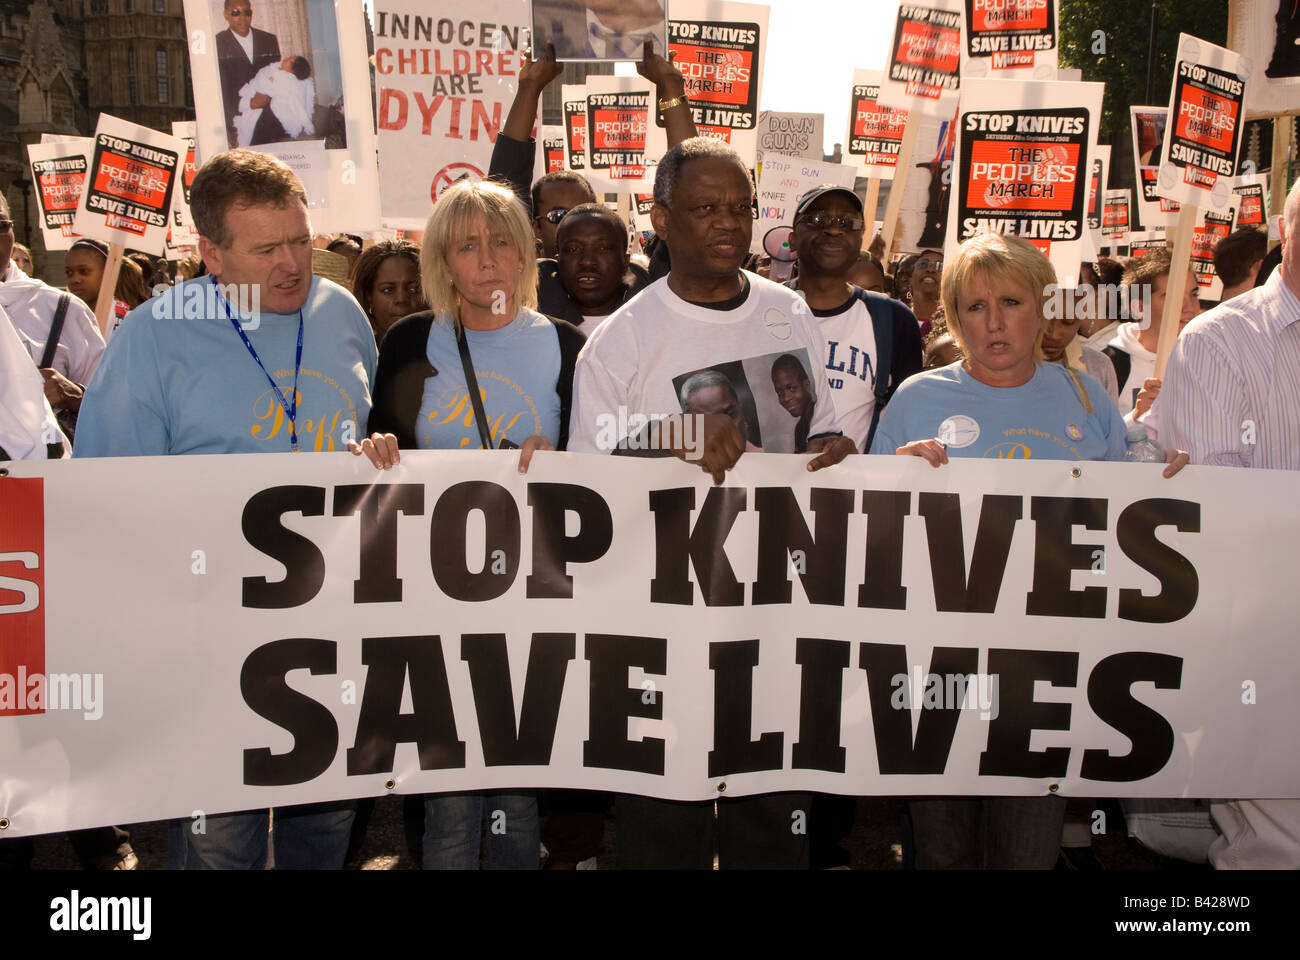 Damilola Taylor's father on The People's March, 20 Sept 2008, London, UK. March and demo against knife crime epidemic. Stock Photo